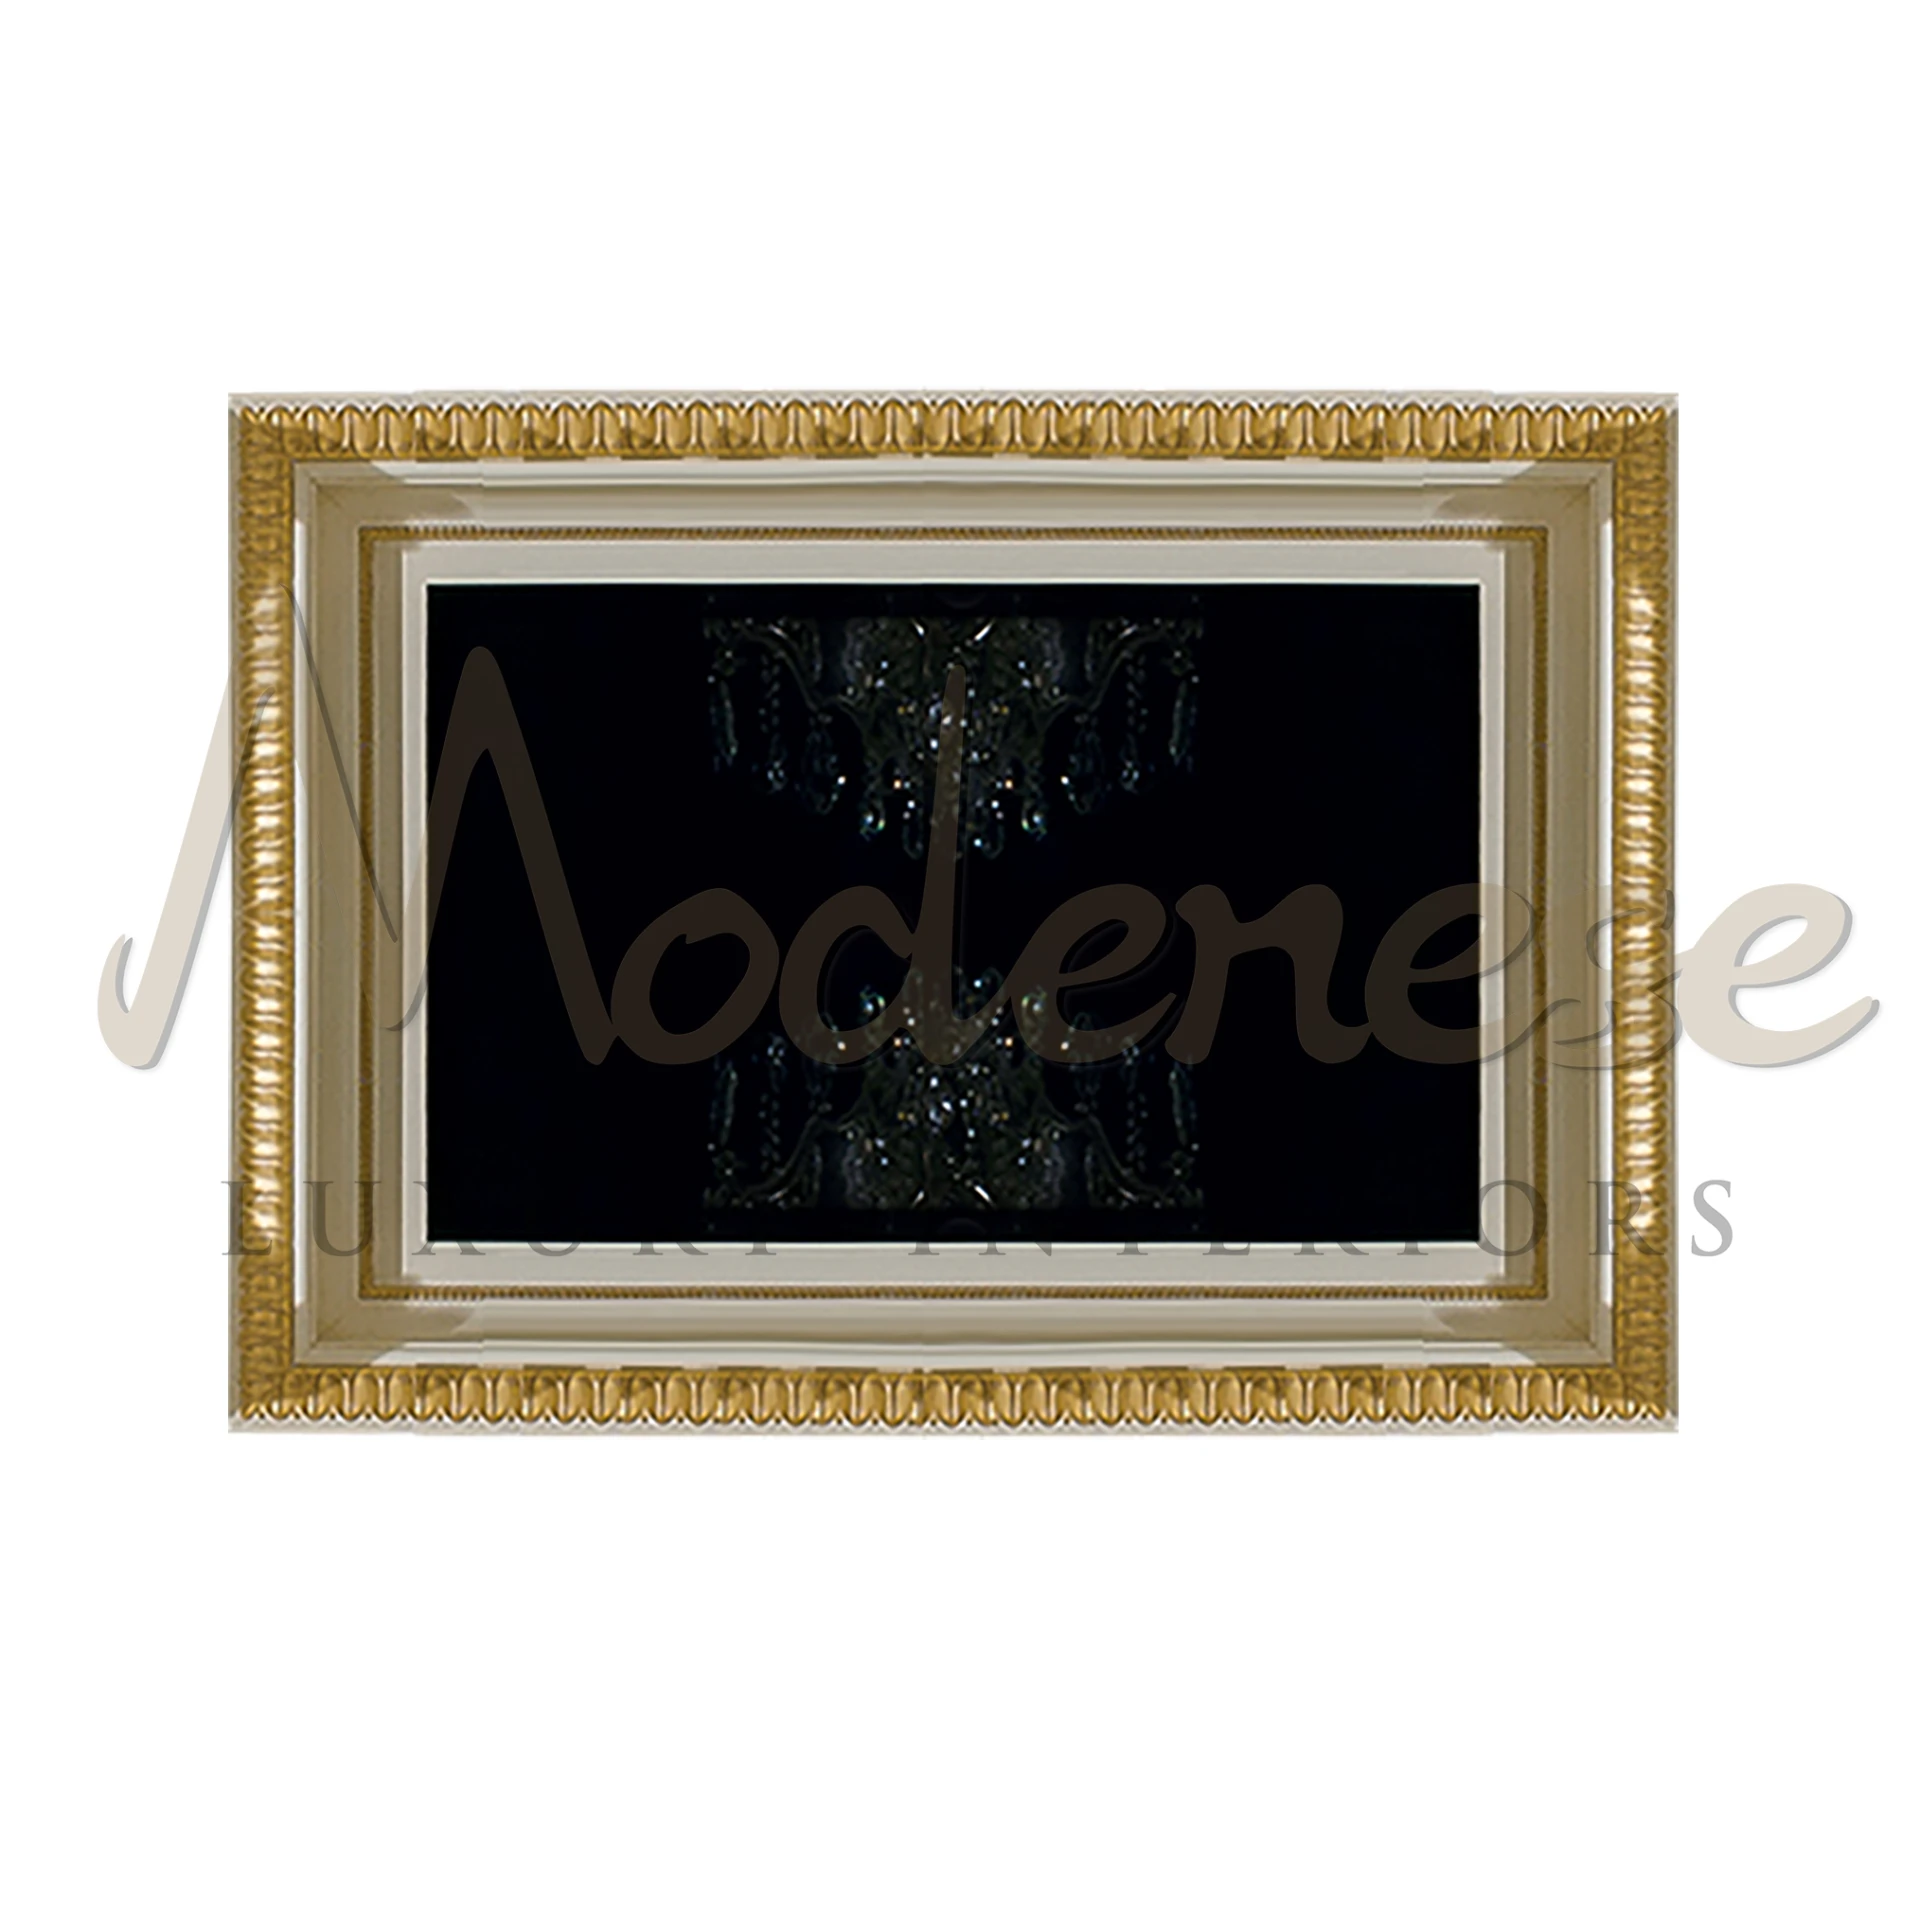 Luxurious White Hand Made Wall TV Frame by Modenese, blending Venetian style with modern functionality for upscale interiors.